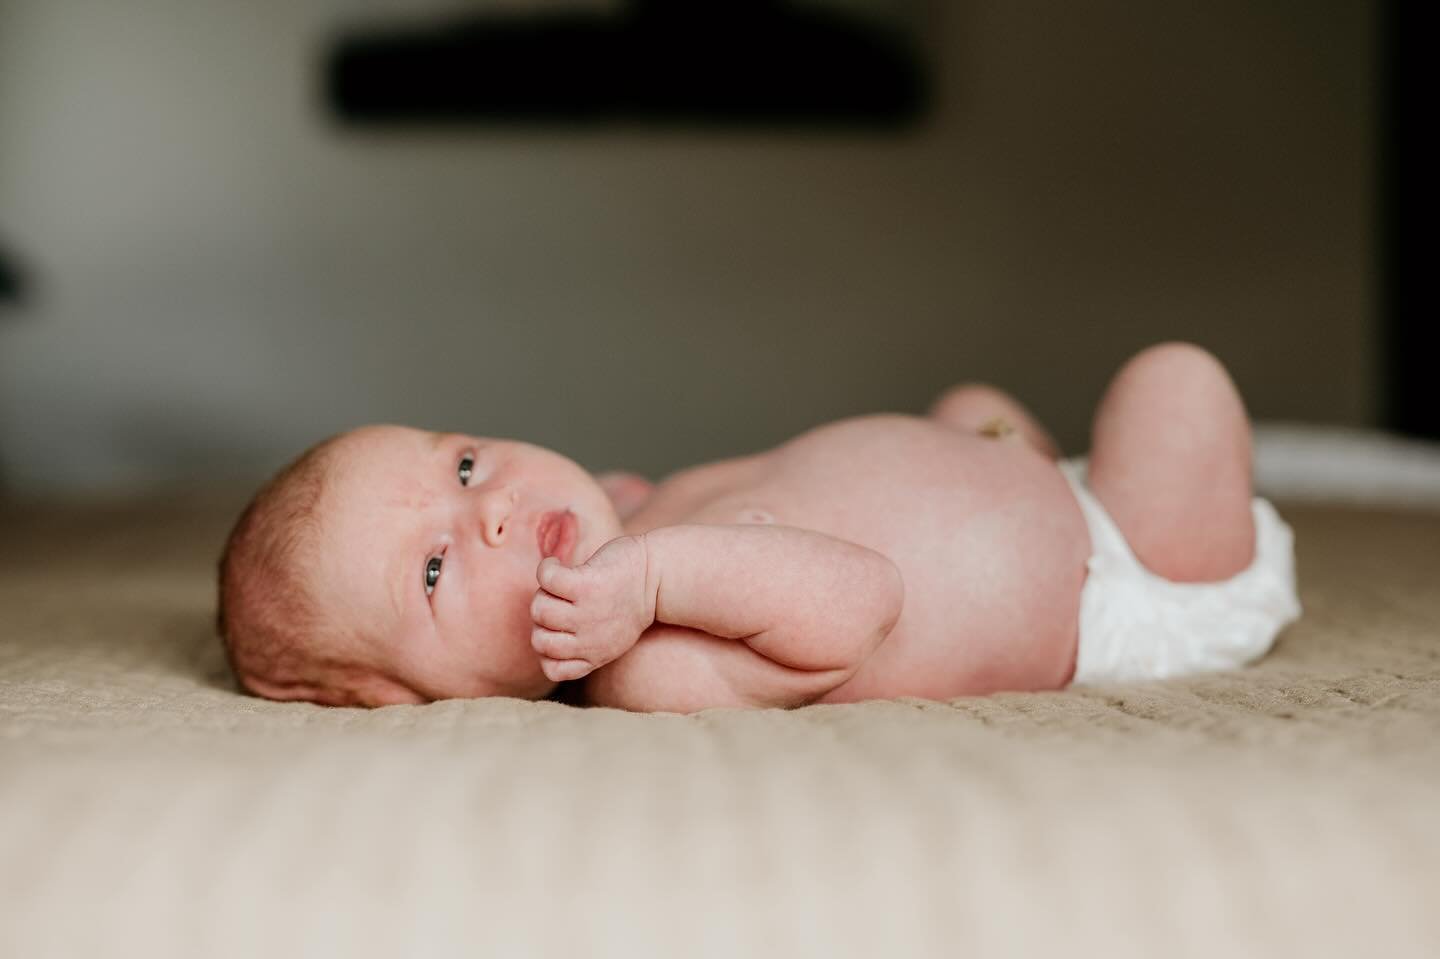 In my opinion, the best way to capture the details of your new baby is simply. No props or poses. Just your perfect new babe as they are. ☺️

#seattlenewbornphotographer 
#bellevuenewbornphotographer #issaquahnewbornphotographer
#gigharbornewbornphot